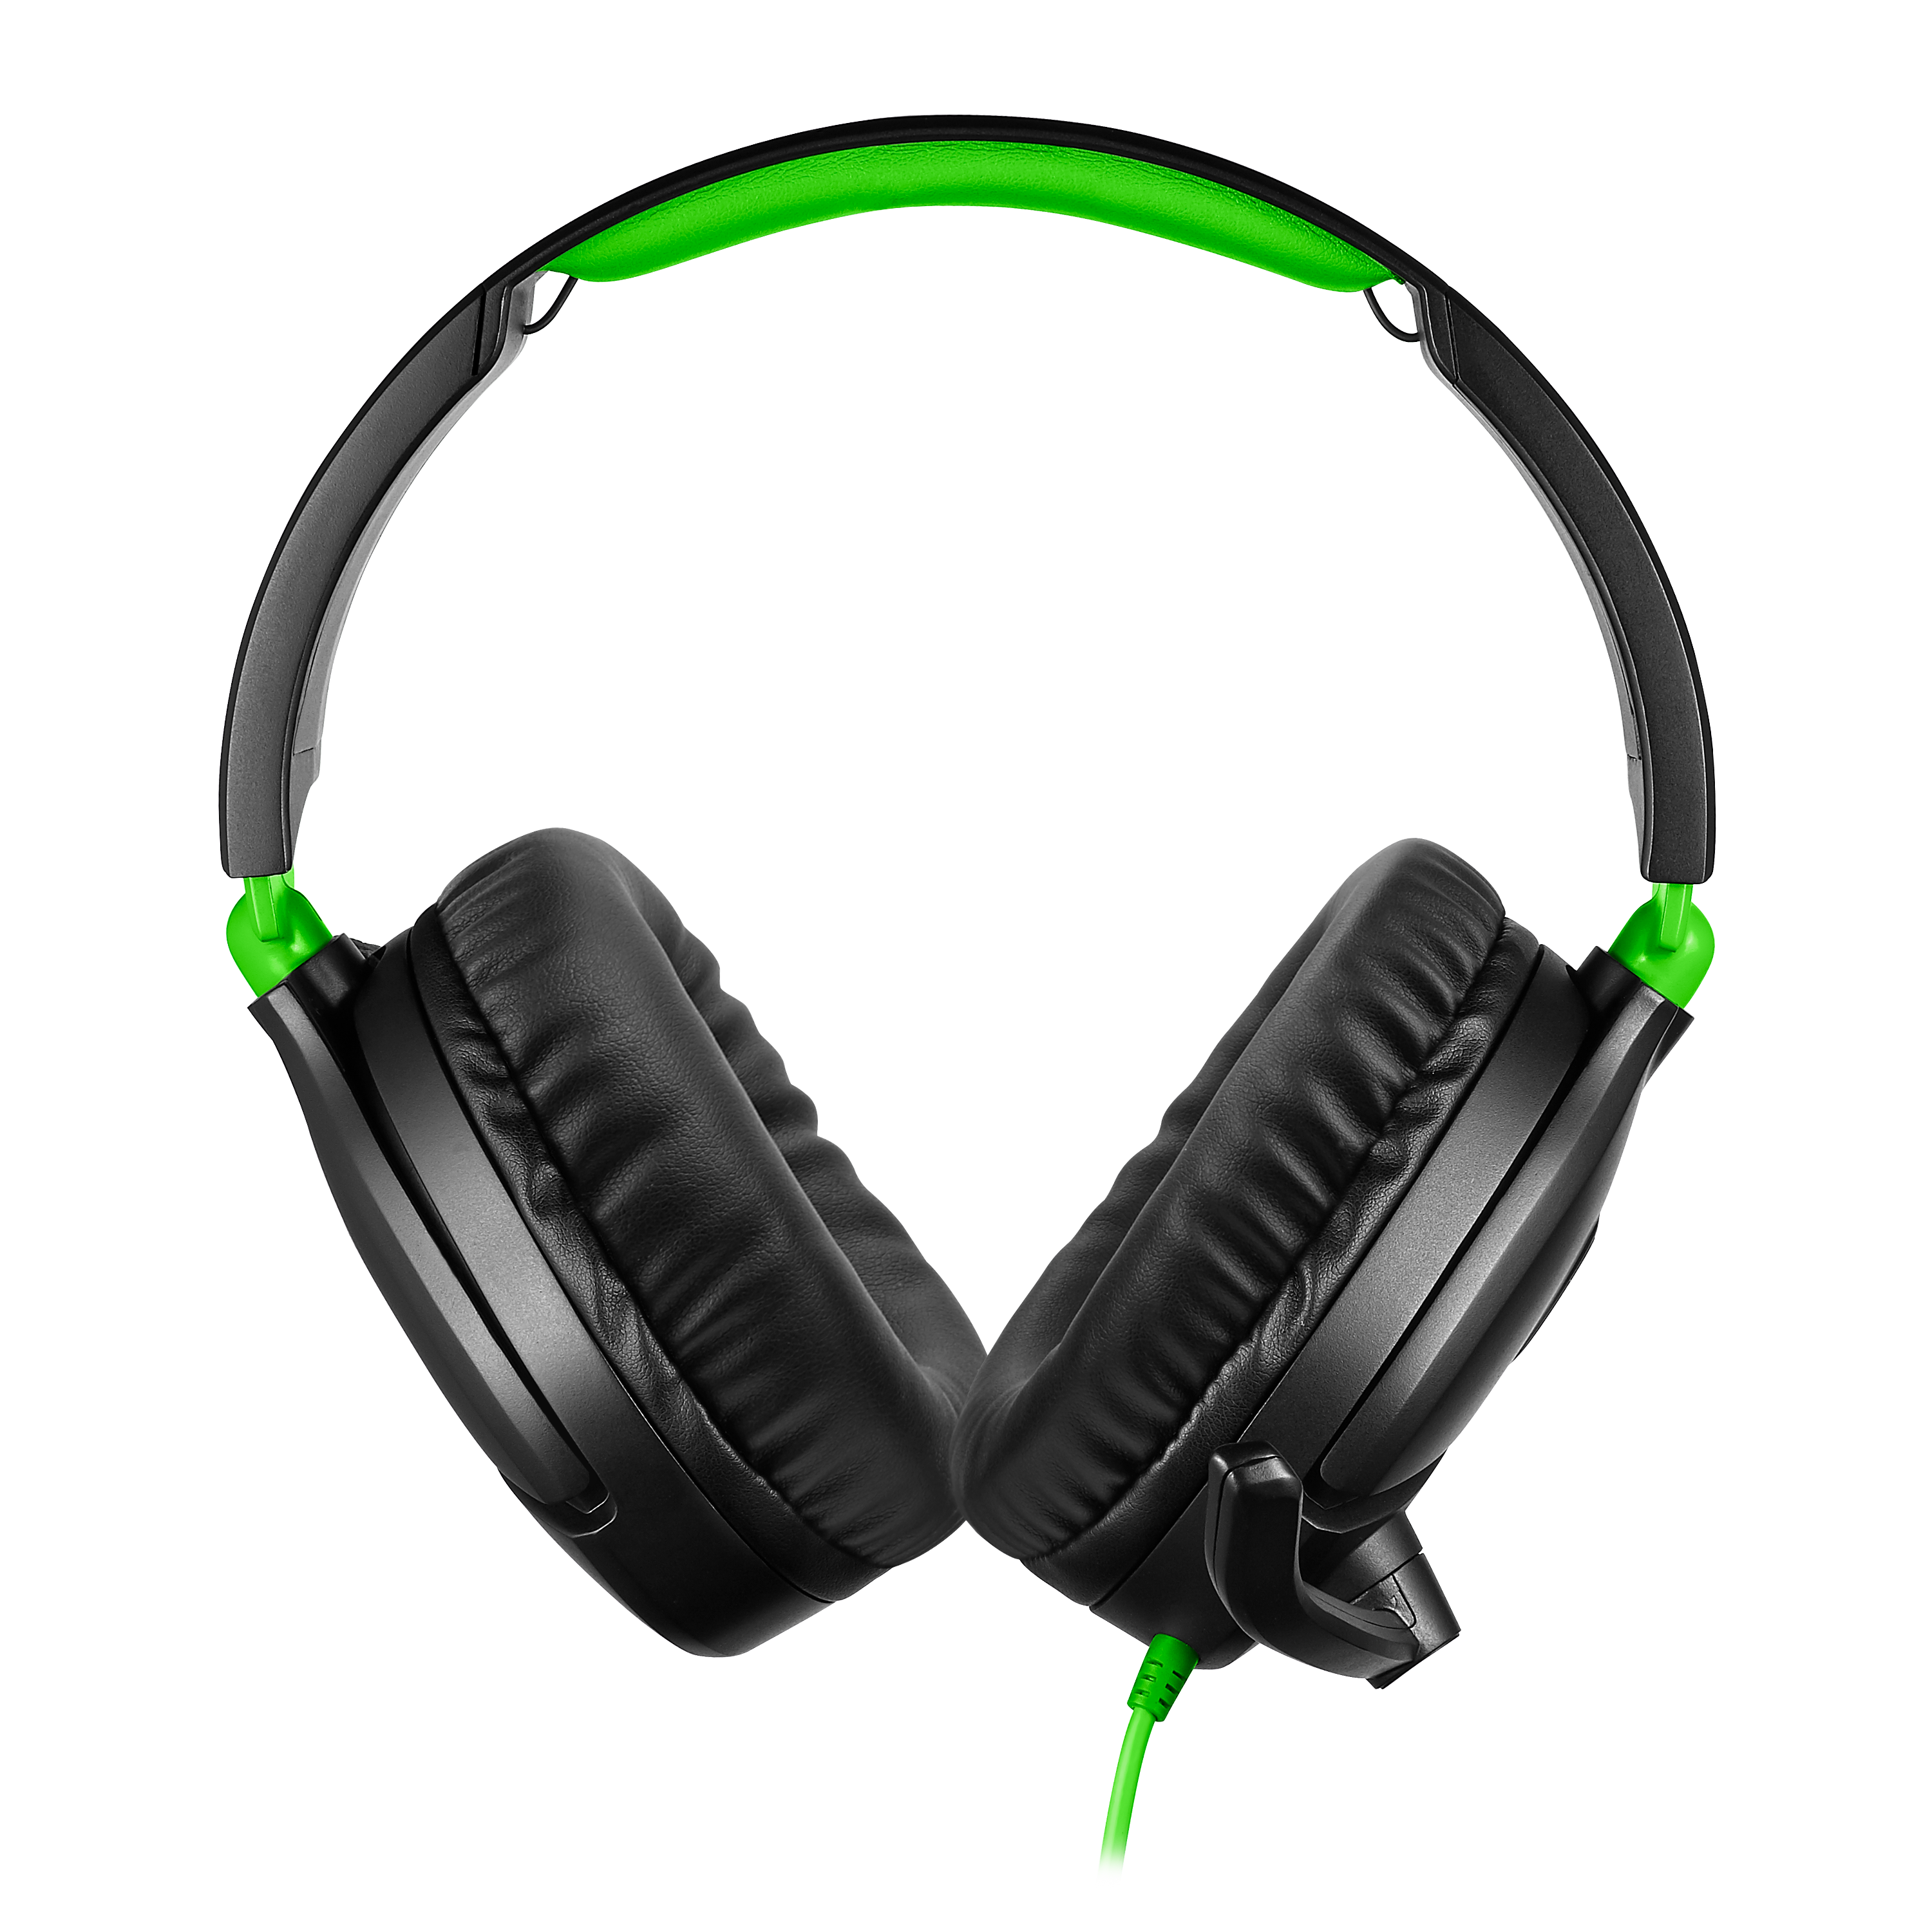 recon 70 headset for xbox one